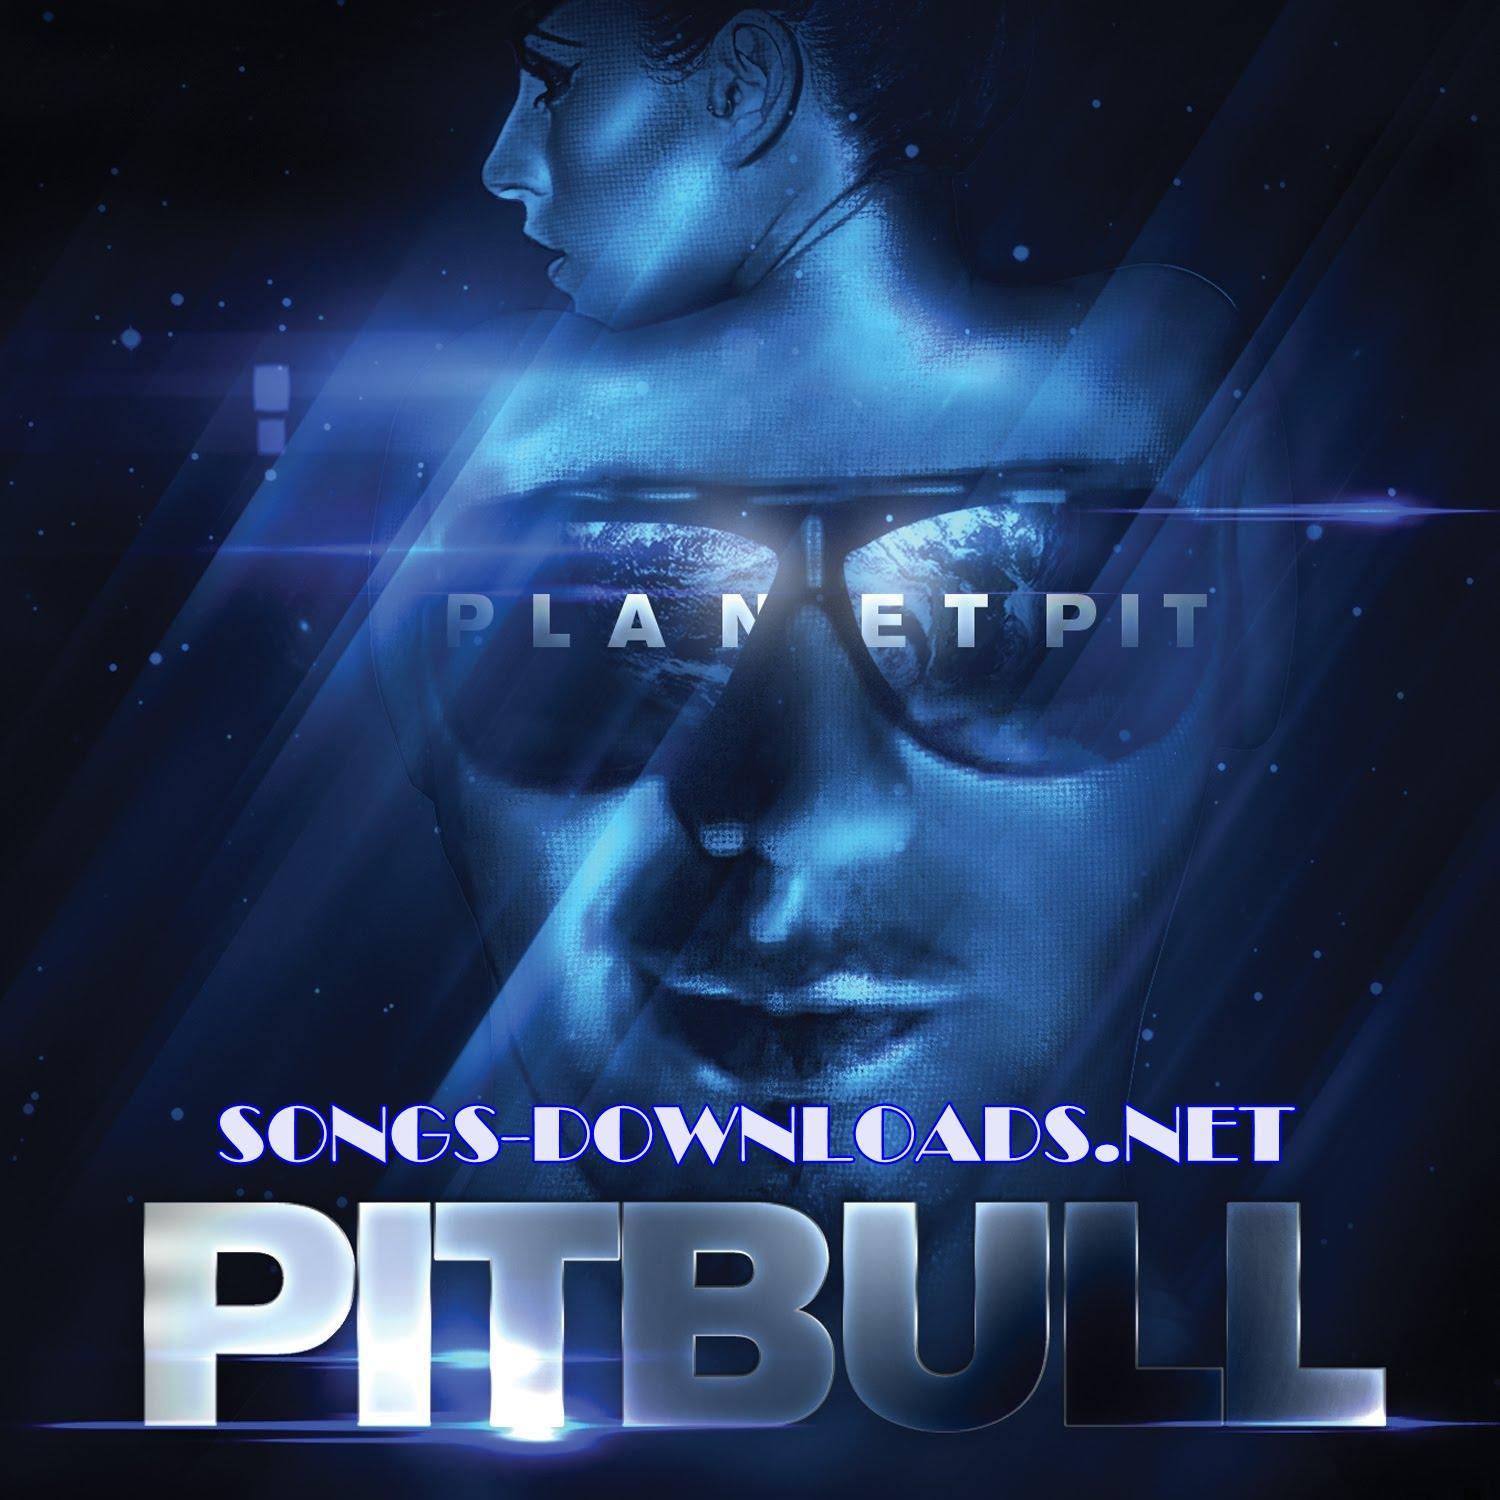 http://3.bp.blogspot.com/-cWQbEoFPBM4/TfT0uimac0I/AAAAAAAABNg/Mr9BGiREfds/s1600/Pitbull+feat.+Enrique+Iglesias+%25E2%2580%2593+Come+N+Go+%2528Prod.+by+Max+Martin%2529+%2528NoTags%2529+song+download%252C+latest+pitbull+songs+download%252Cpitbull+remix+song+music+download%252C320kbps++song+download%252Cmusic%252Clisten+online%252Ccome+n++go+song.jpg